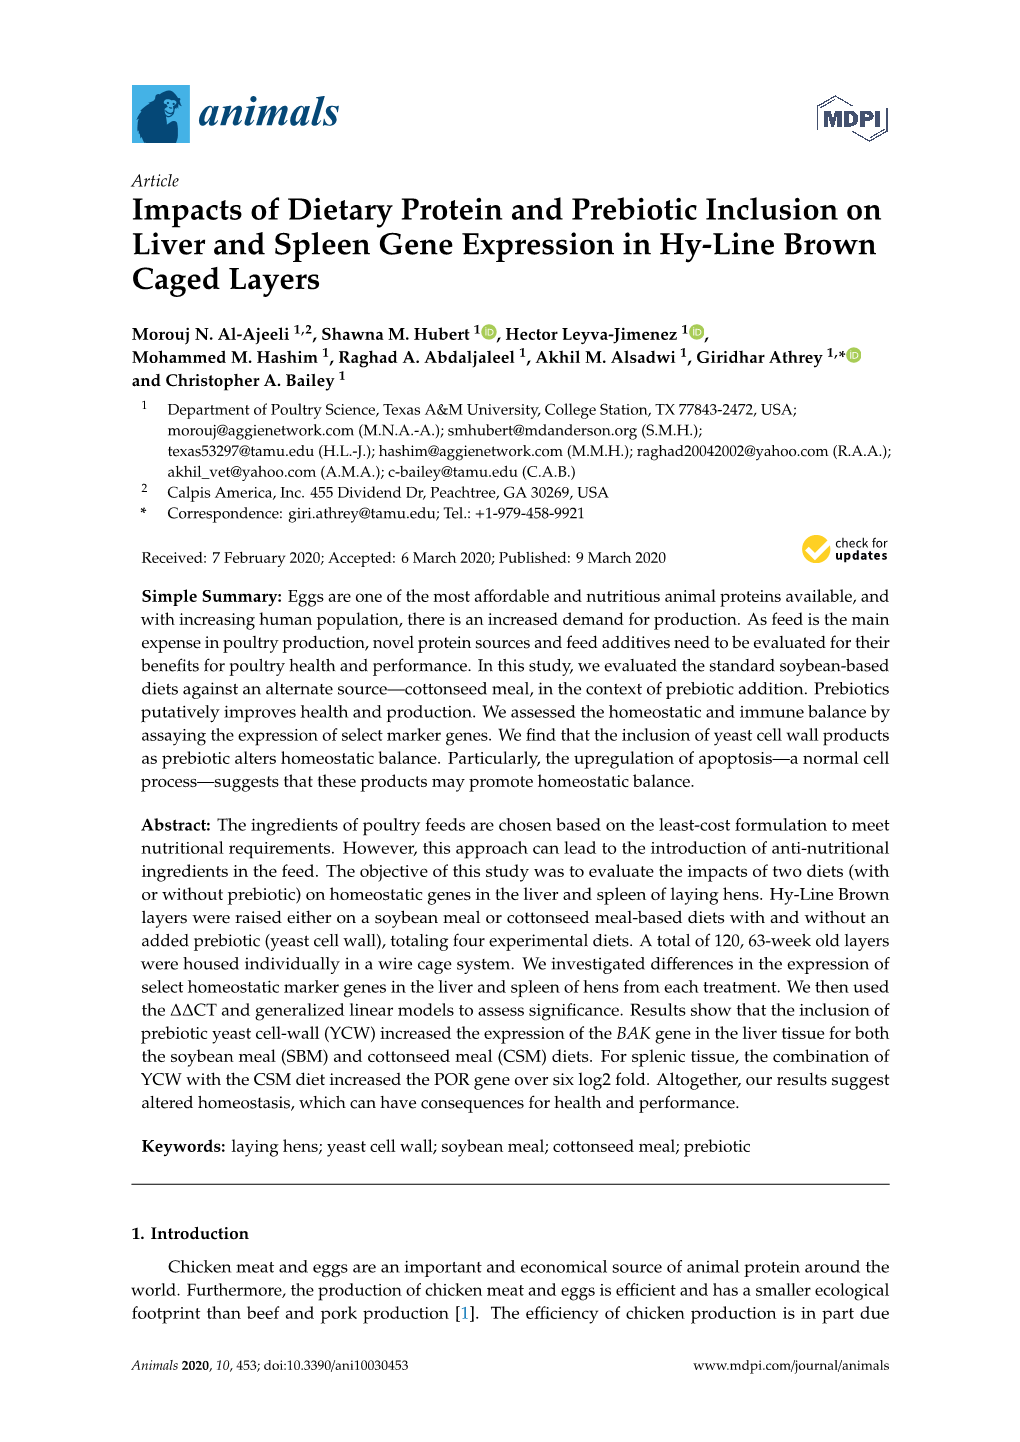 Impacts of Dietary Protein and Prebiotic Inclusion on Liver and Spleen Gene Expression in Hy-Line Brown Caged Layers